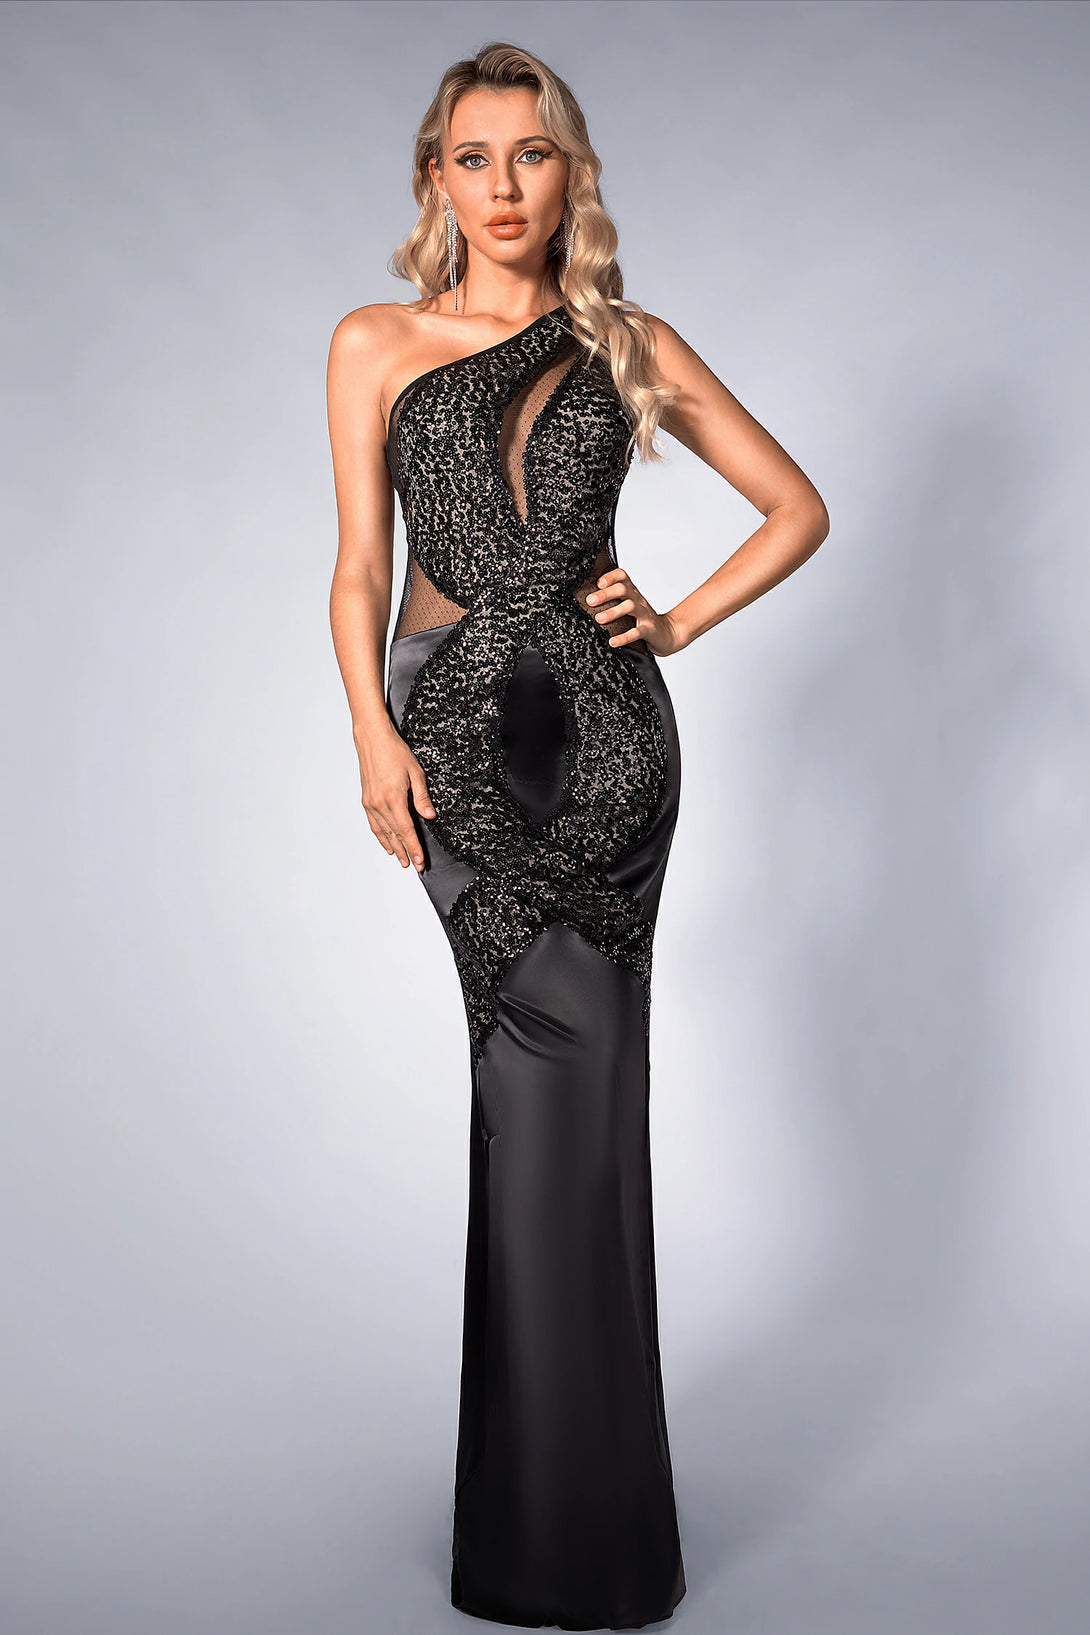 Black Pearl-Studded Maxi Dress - Elegance and Allure Combined – Acmefun